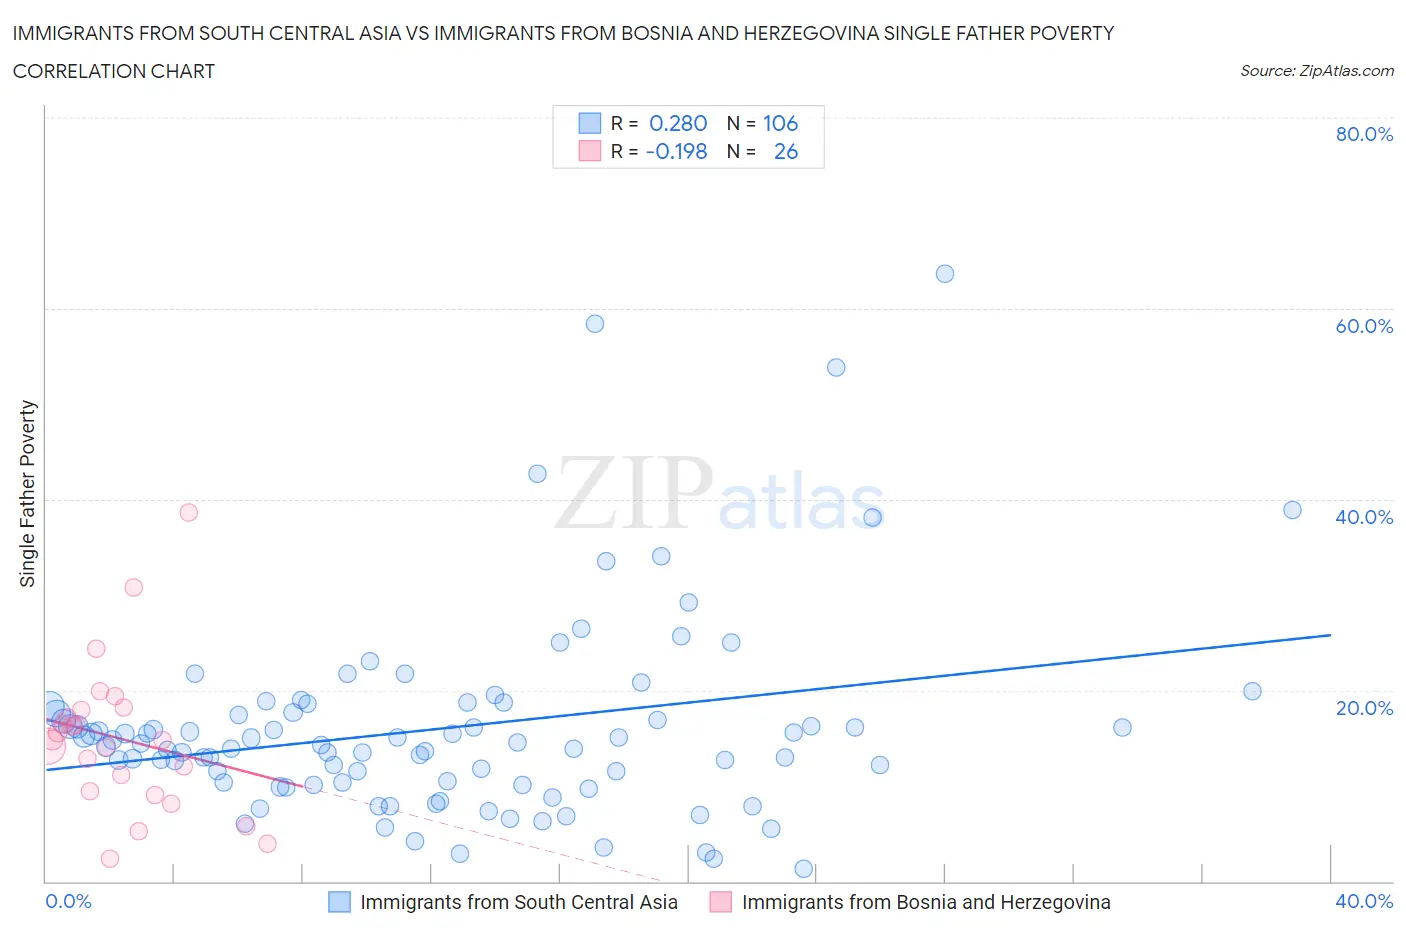 Immigrants from South Central Asia vs Immigrants from Bosnia and Herzegovina Single Father Poverty